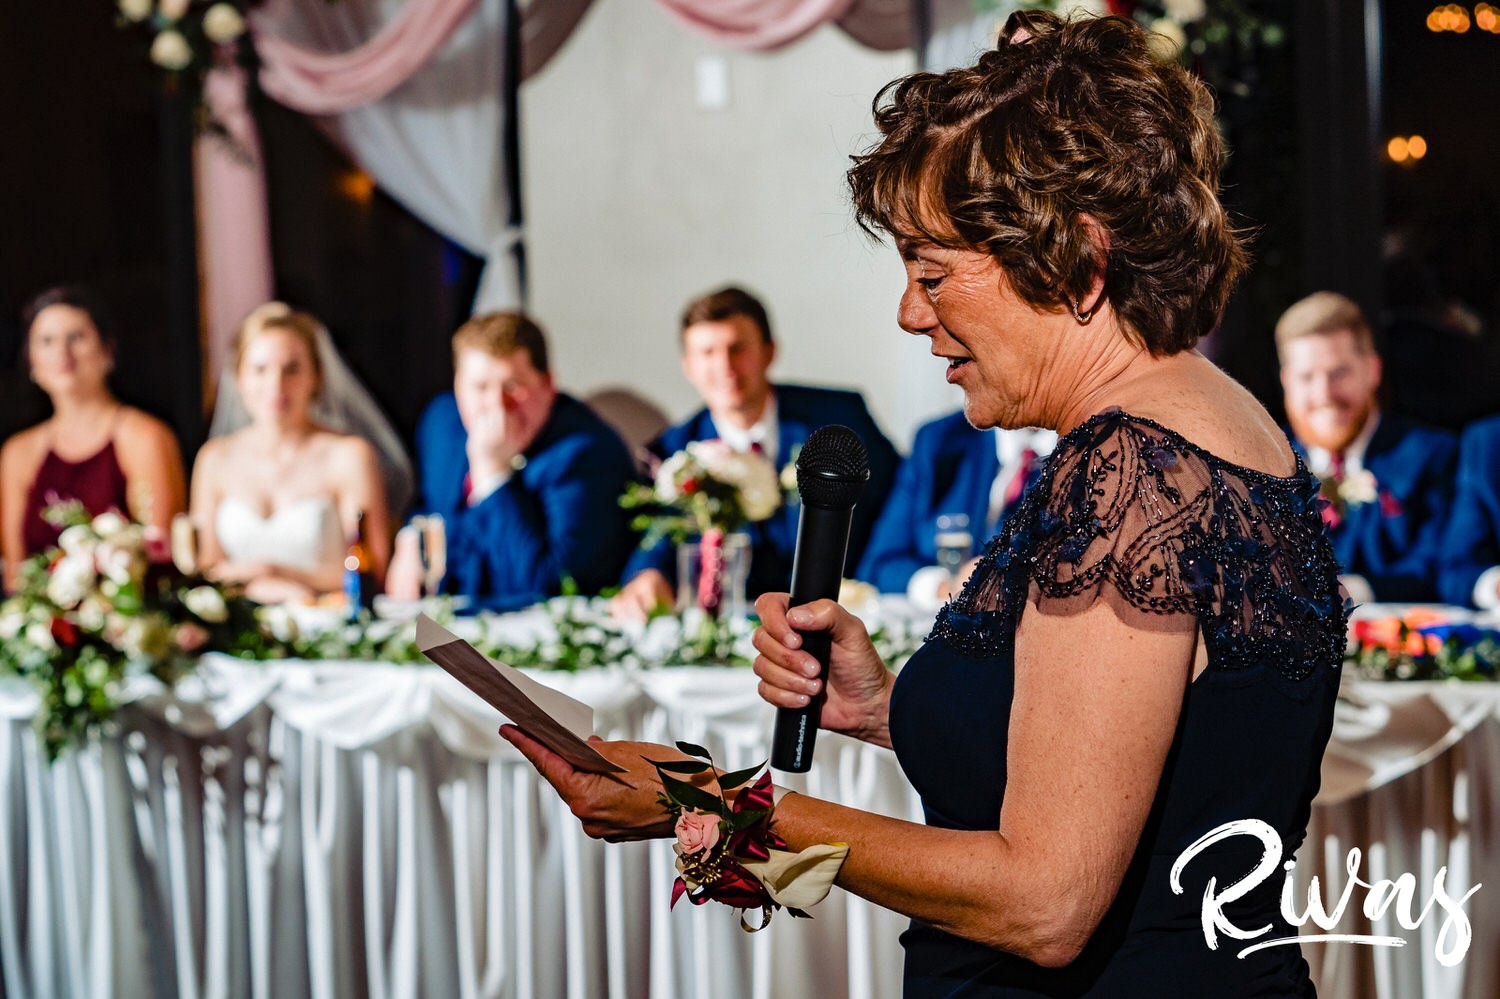 A candid picture taken over the shoulder of the mother of the bride as she toasts her daughter and new son-in-law during their fall wedding reception at Piazza Messina. 